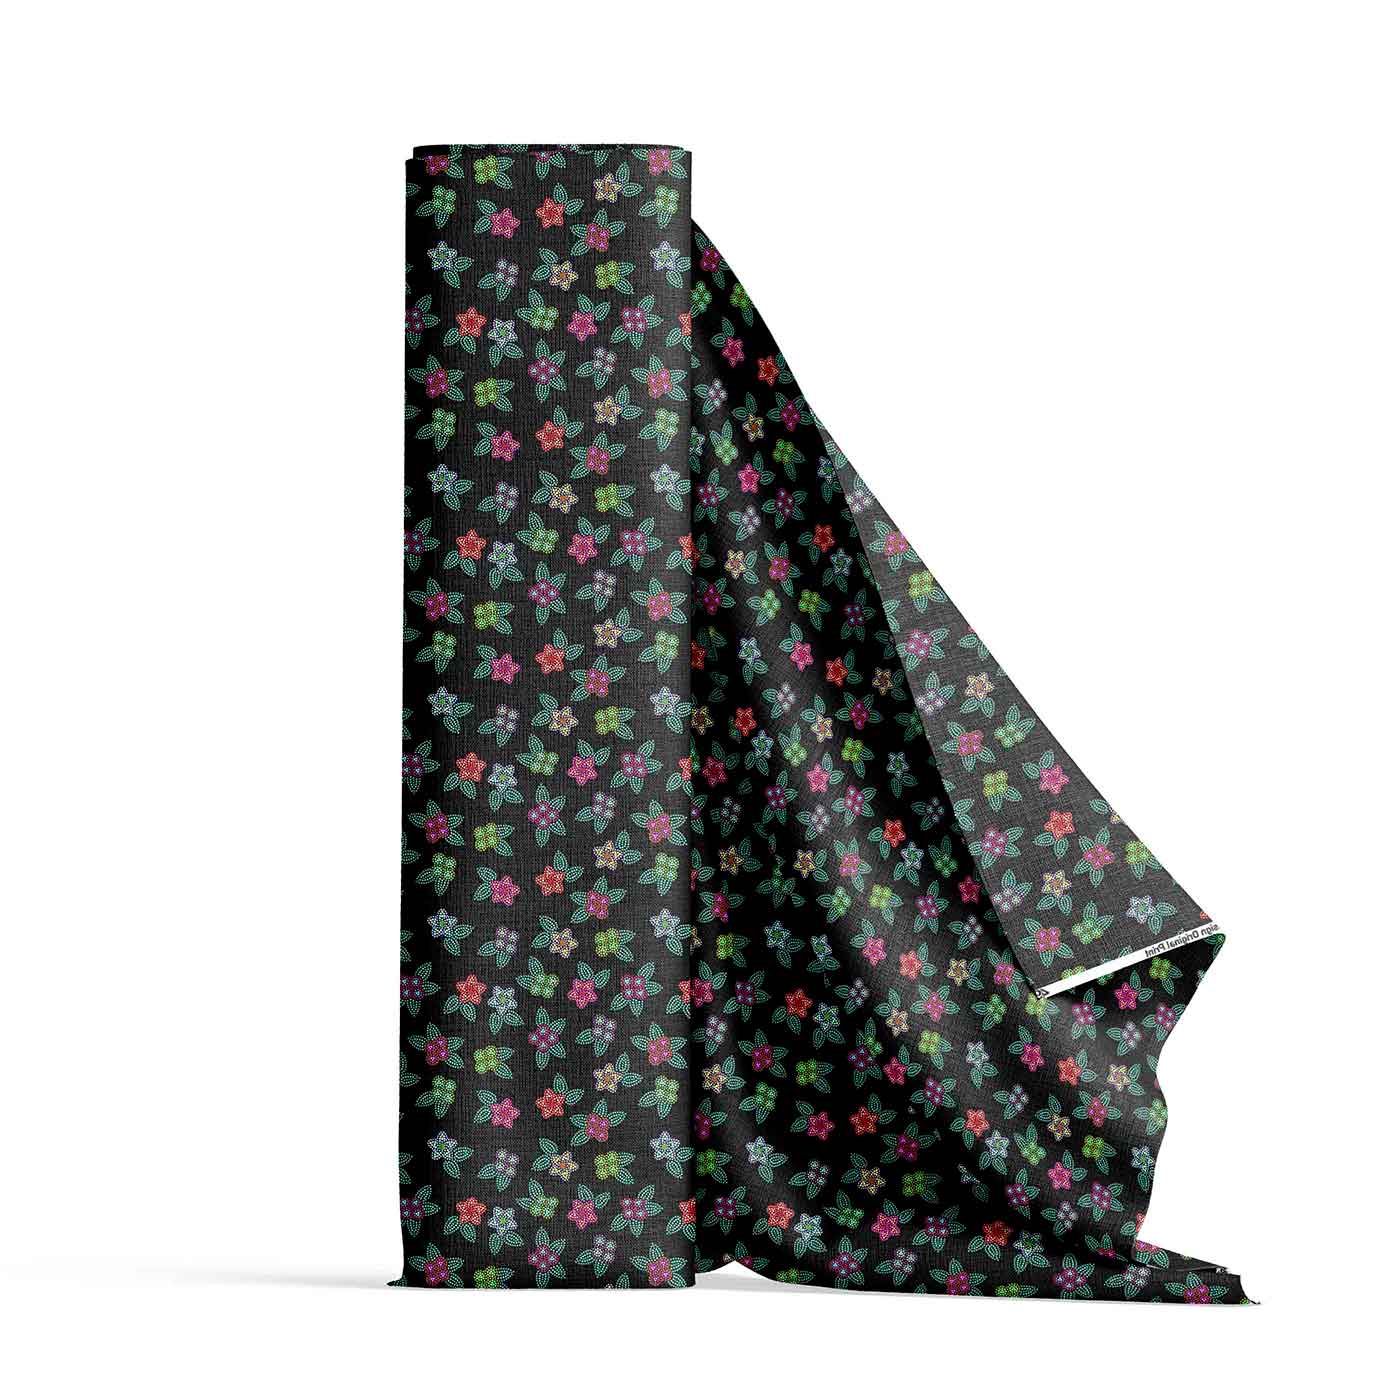 Berry Flowers Black Satin Fabric By the Yard Pre Order